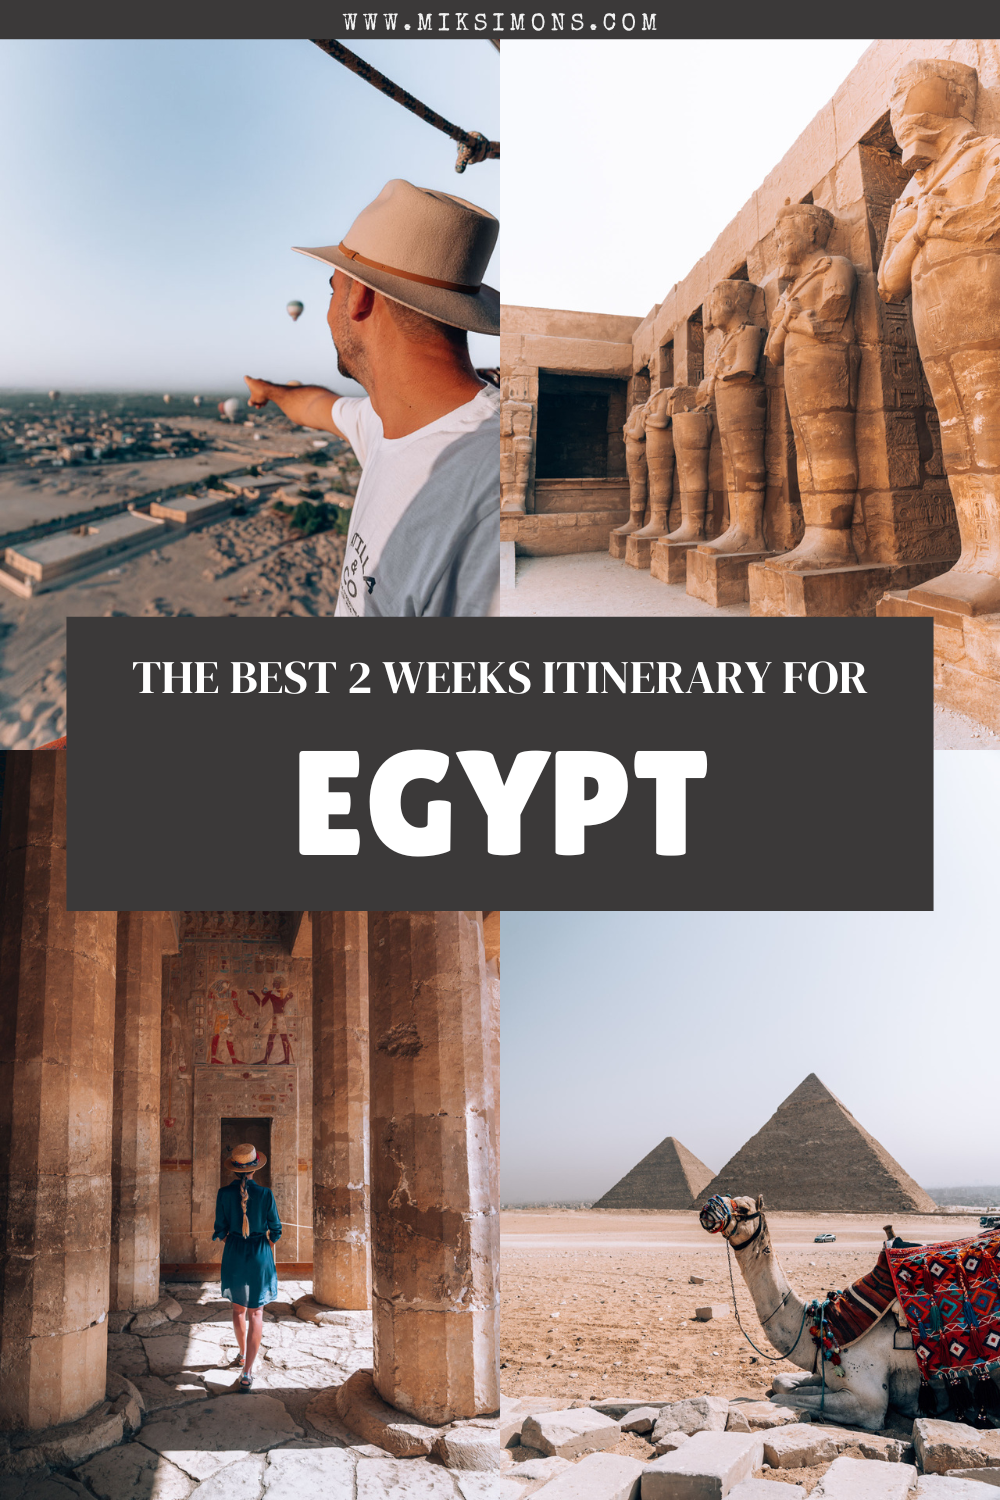 The perfect 2 weeks in Egypt itinerary3